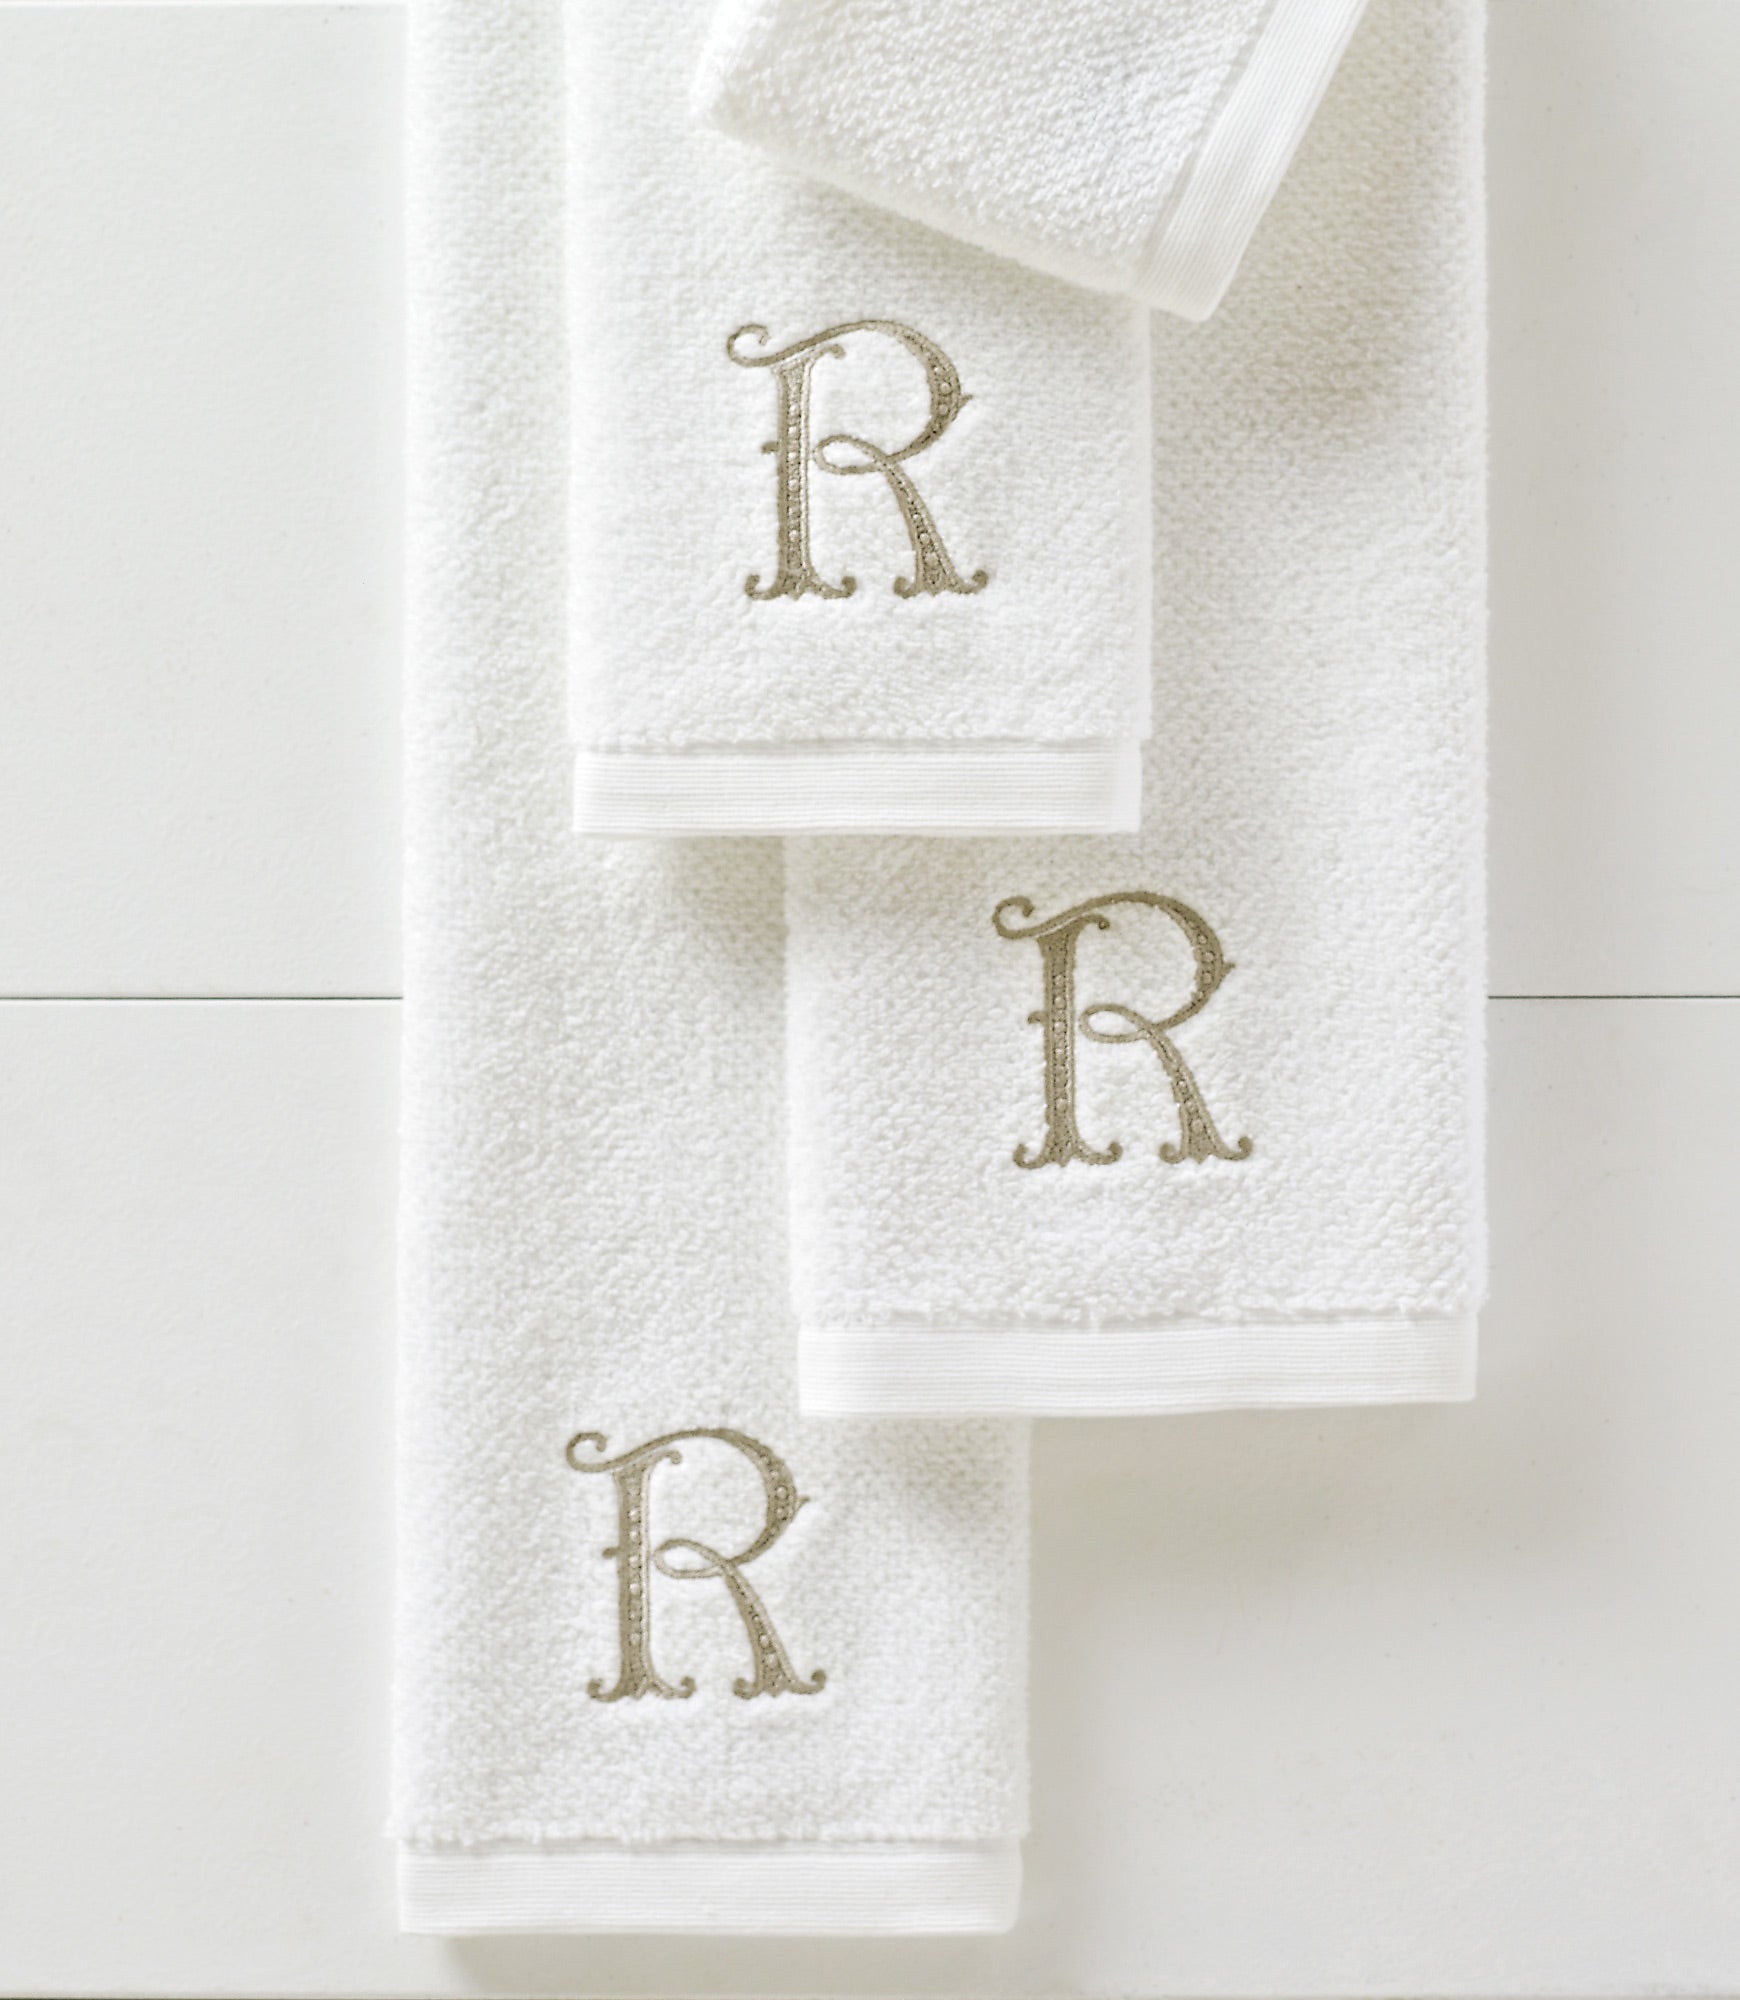 Hand Towel - Luxury Linens, Bedding, Home Fragrance, and More From